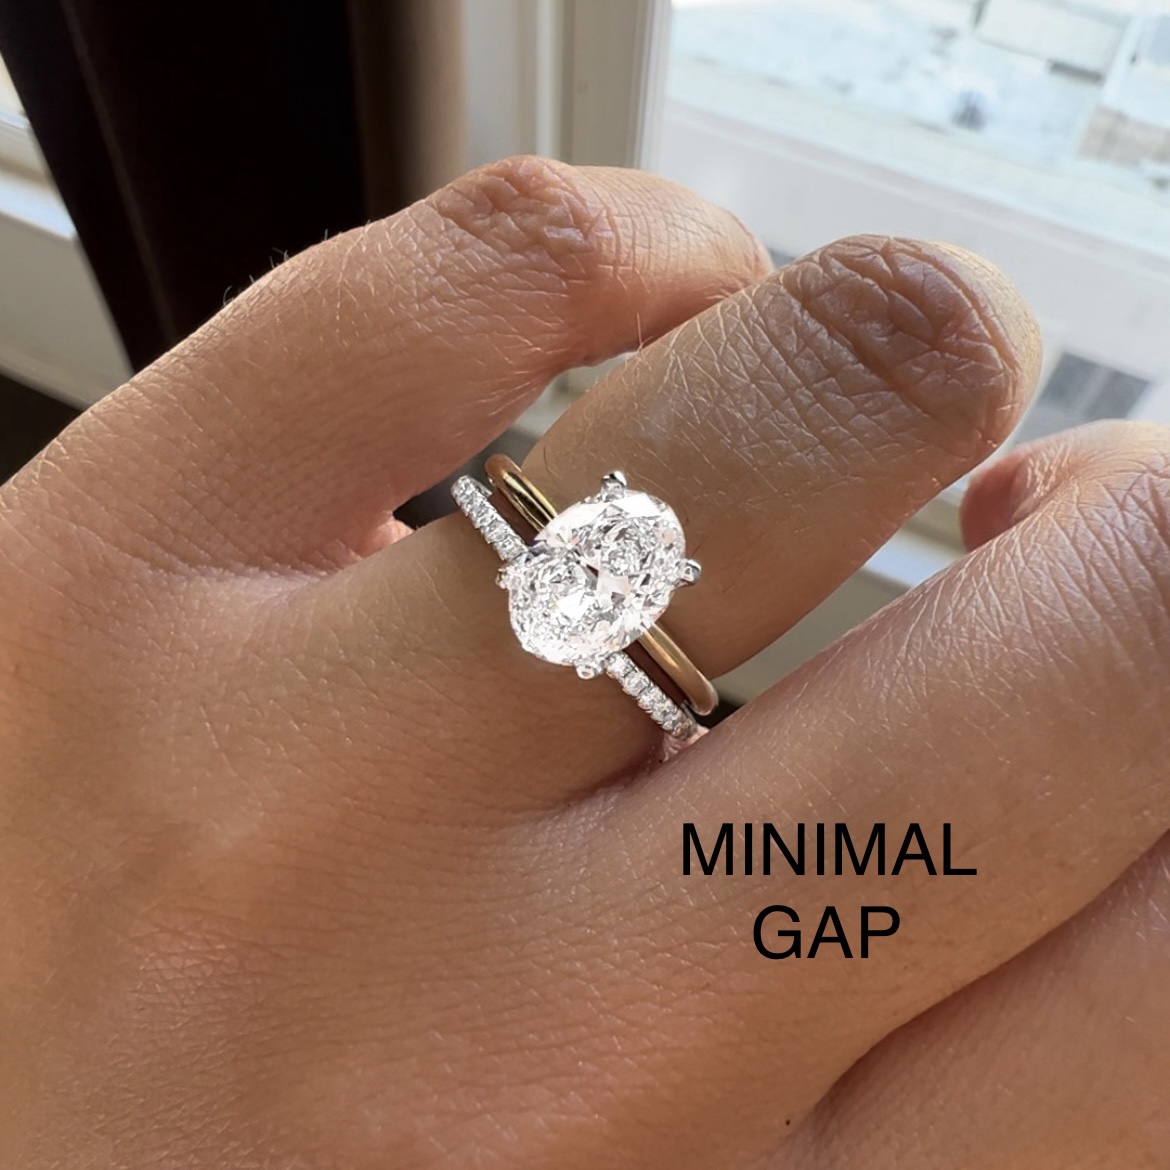 Different shaped ring band ideas | Wedding ring shapes, Ring style guide,  Wedding ring bands